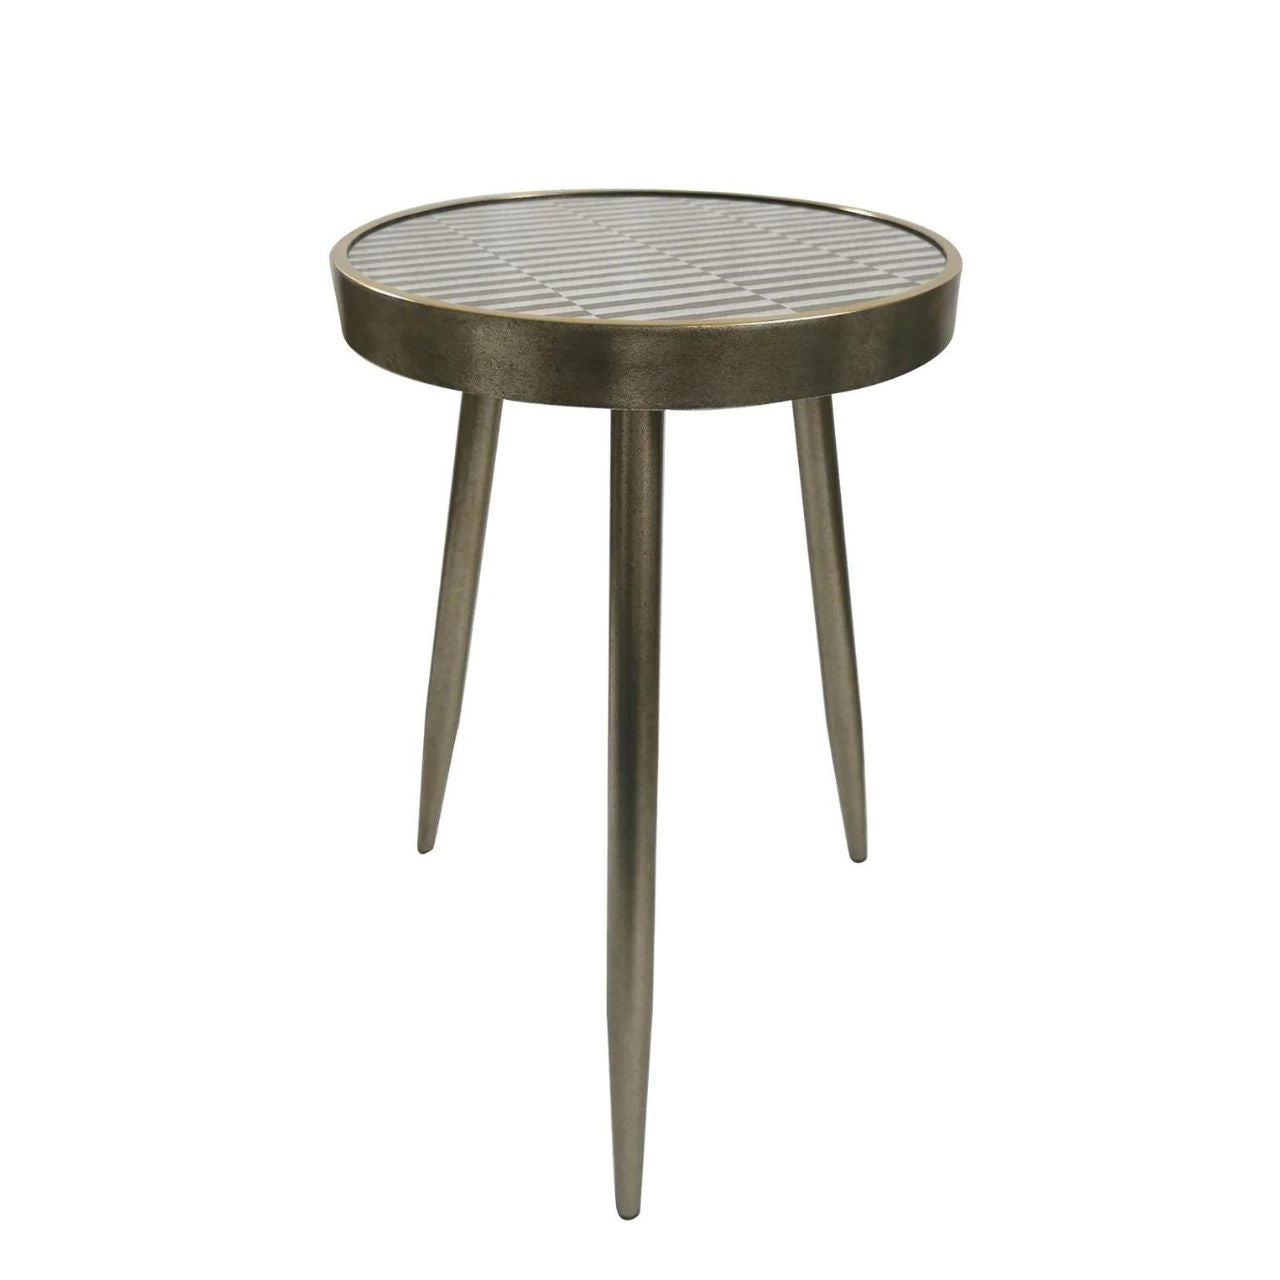 Sierra Table by Mindy Brownes Interiors  The Mindy Brownes Sierra Table